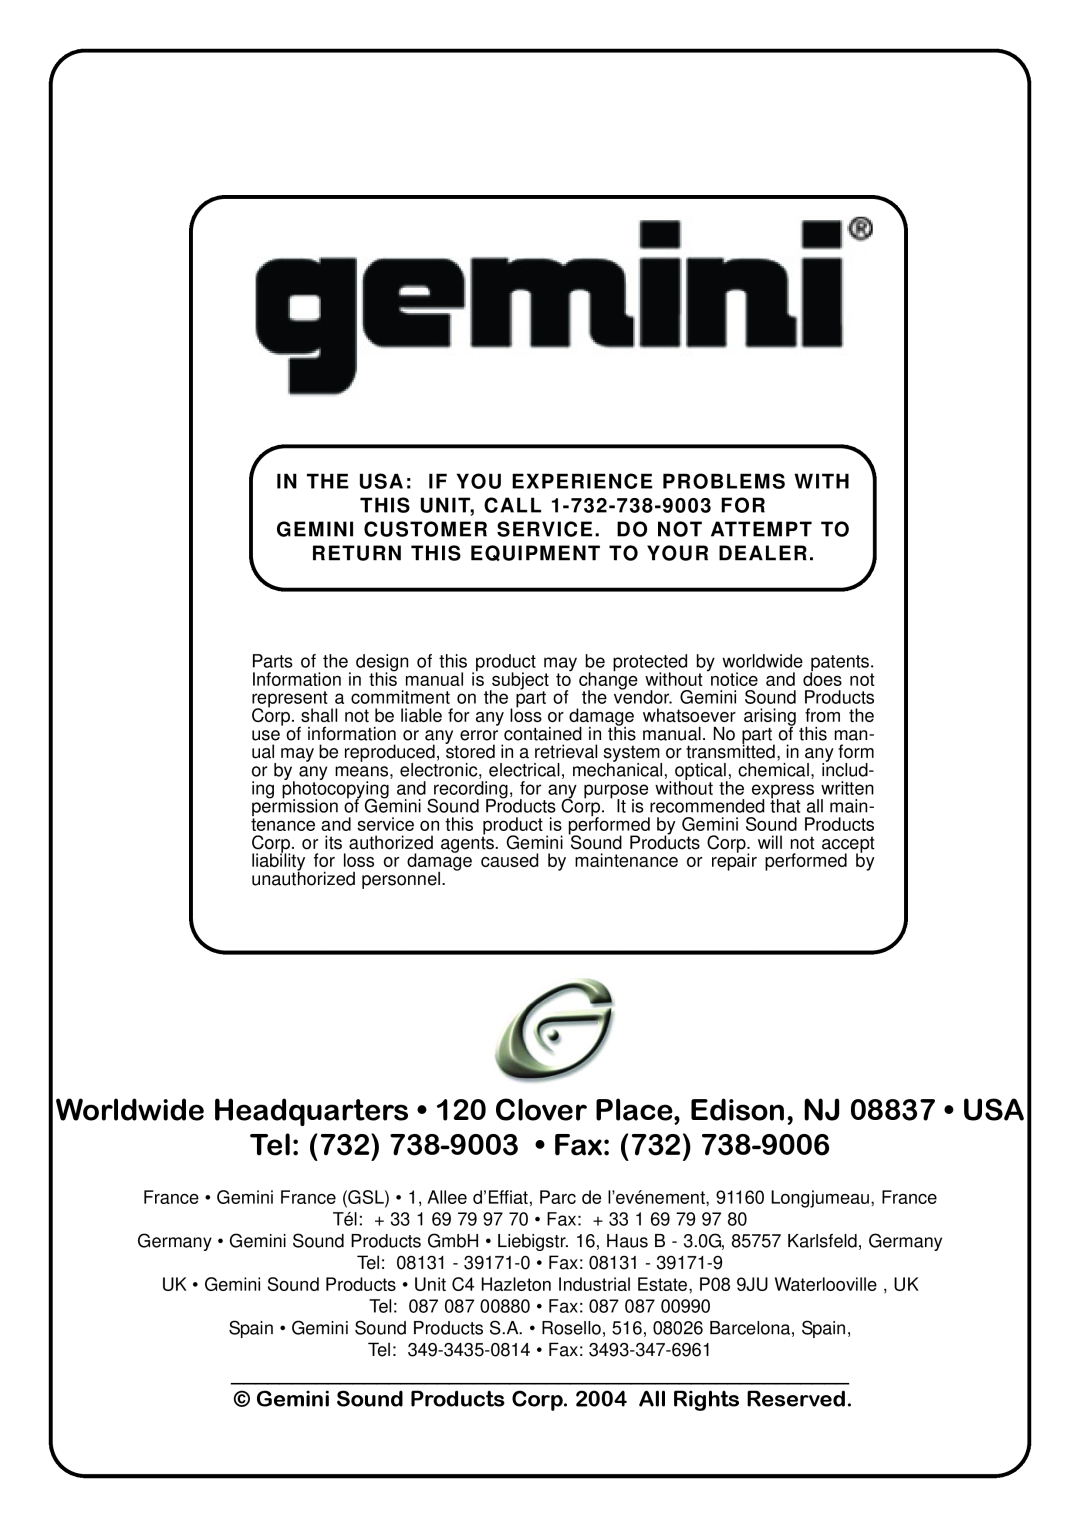 Gemini TT-01mkii manual In The Usa If You Experience Problems With, THIS UNIT, CALL 1-732-738-9003FOR, Tel 732 738-9003 Fax 